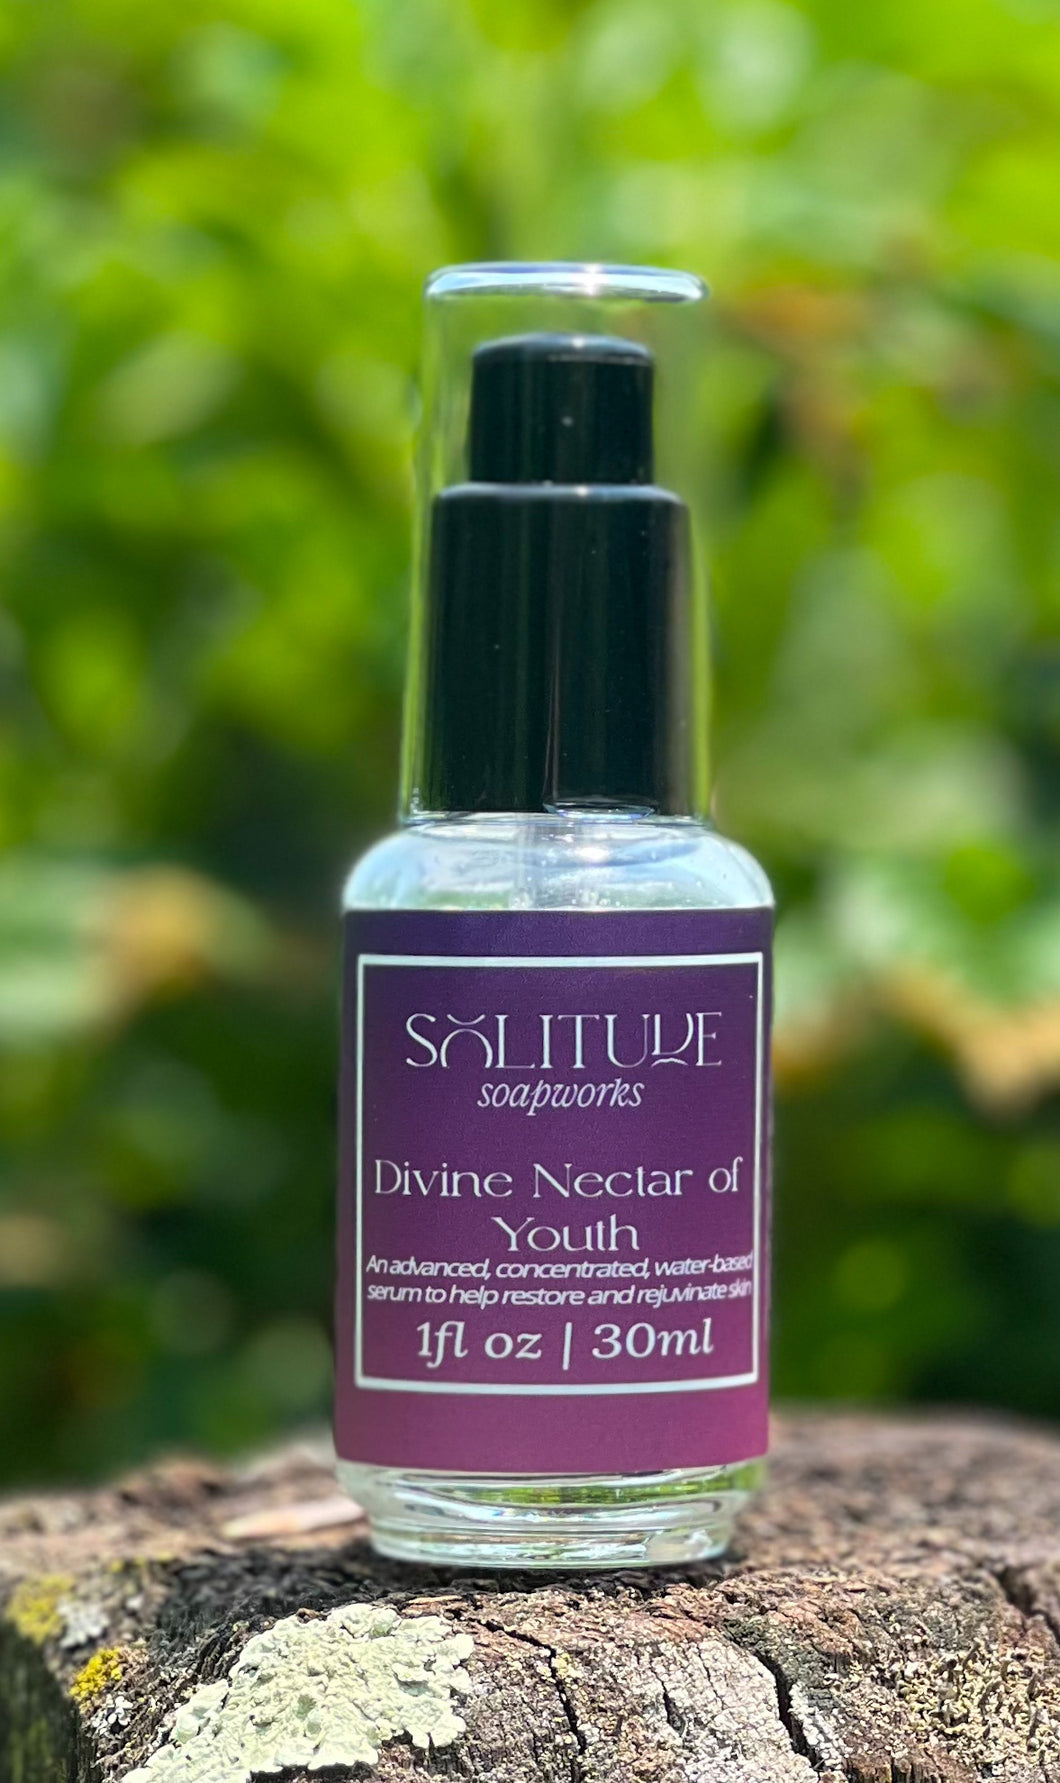 Divine Nectar of Youth Facial Serum